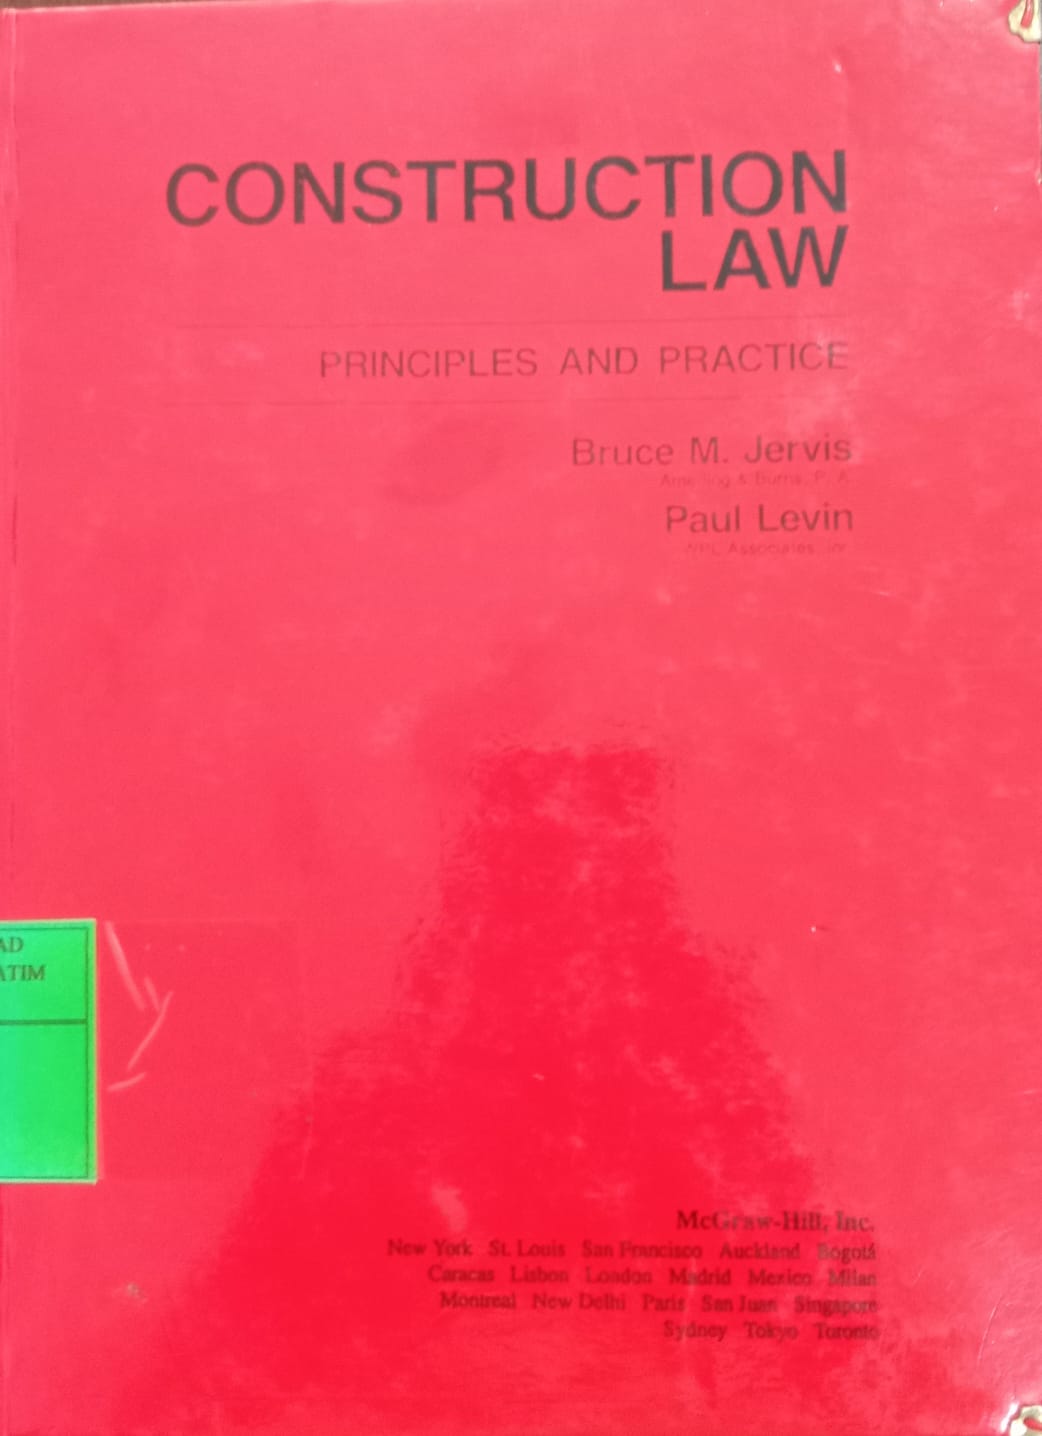 Contruction Law Principles and Practice